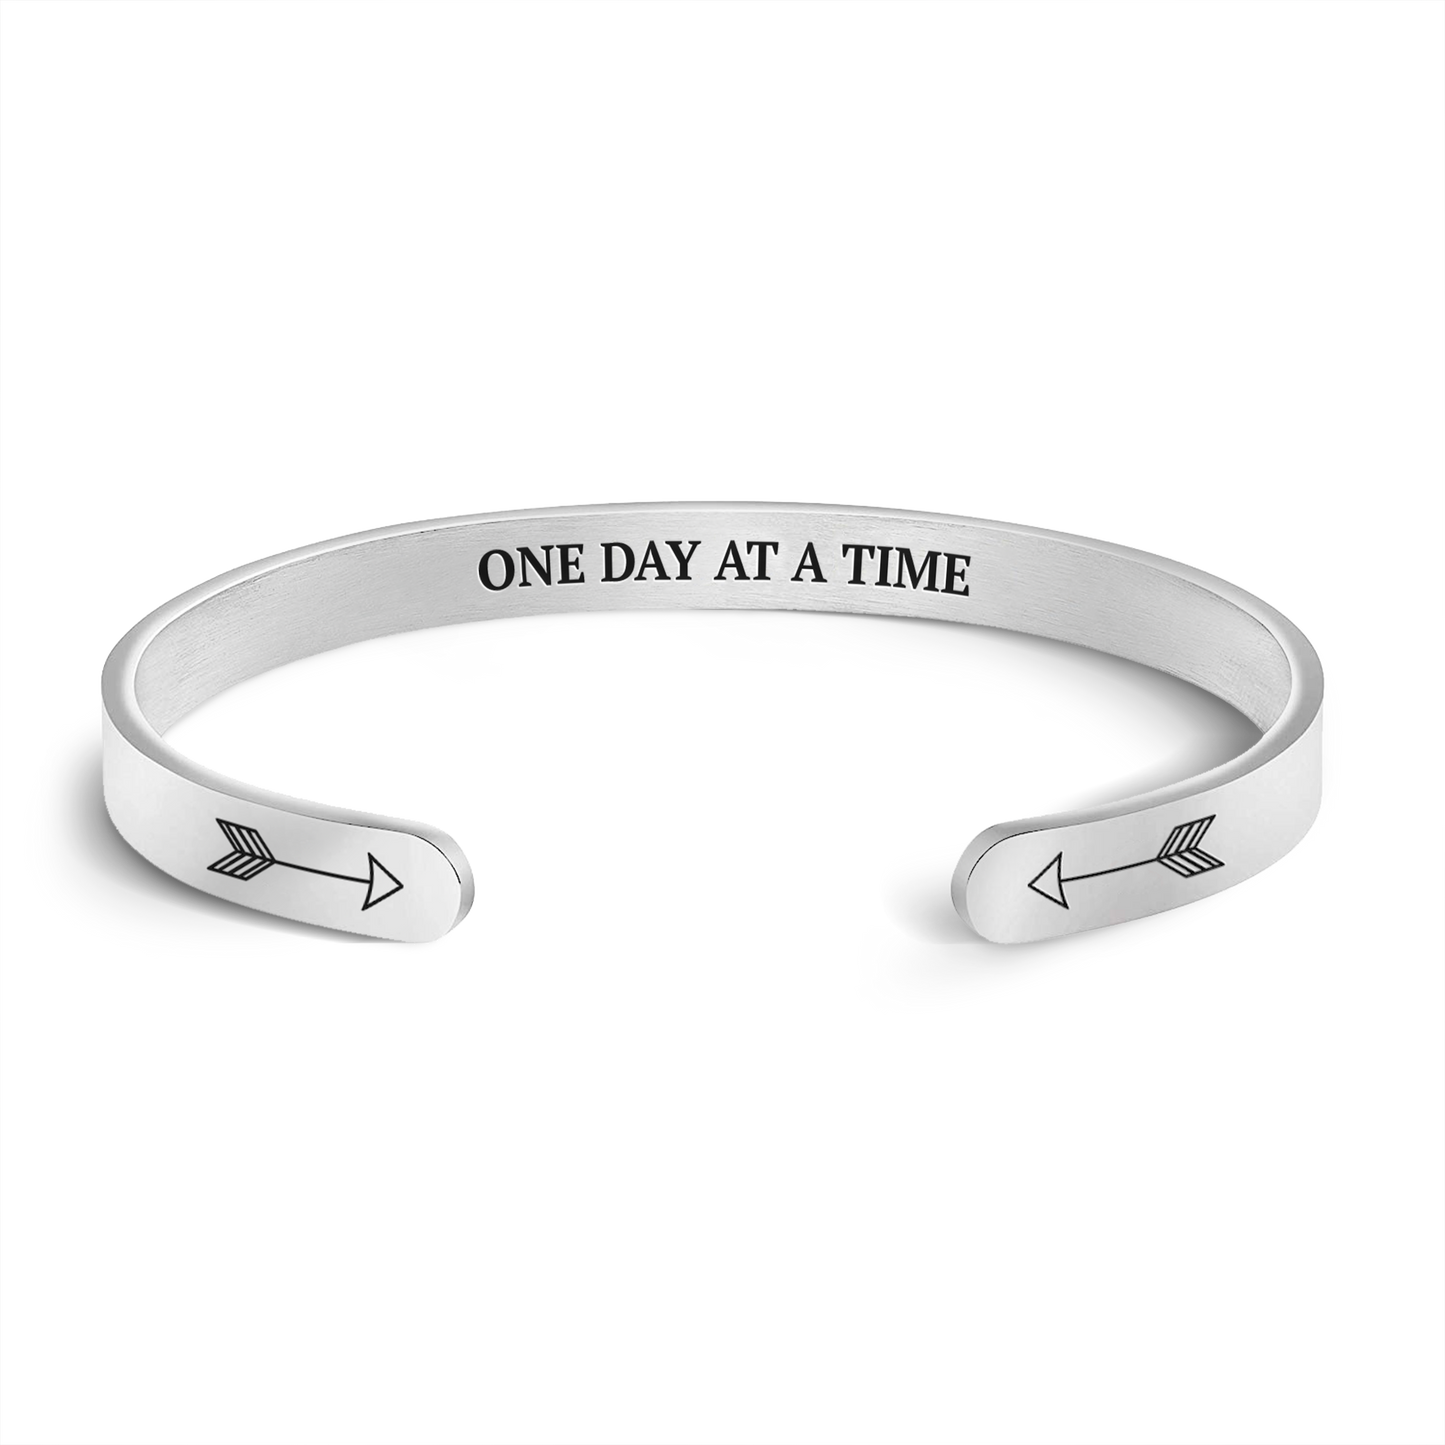 One day at a time bracelet with silver plating